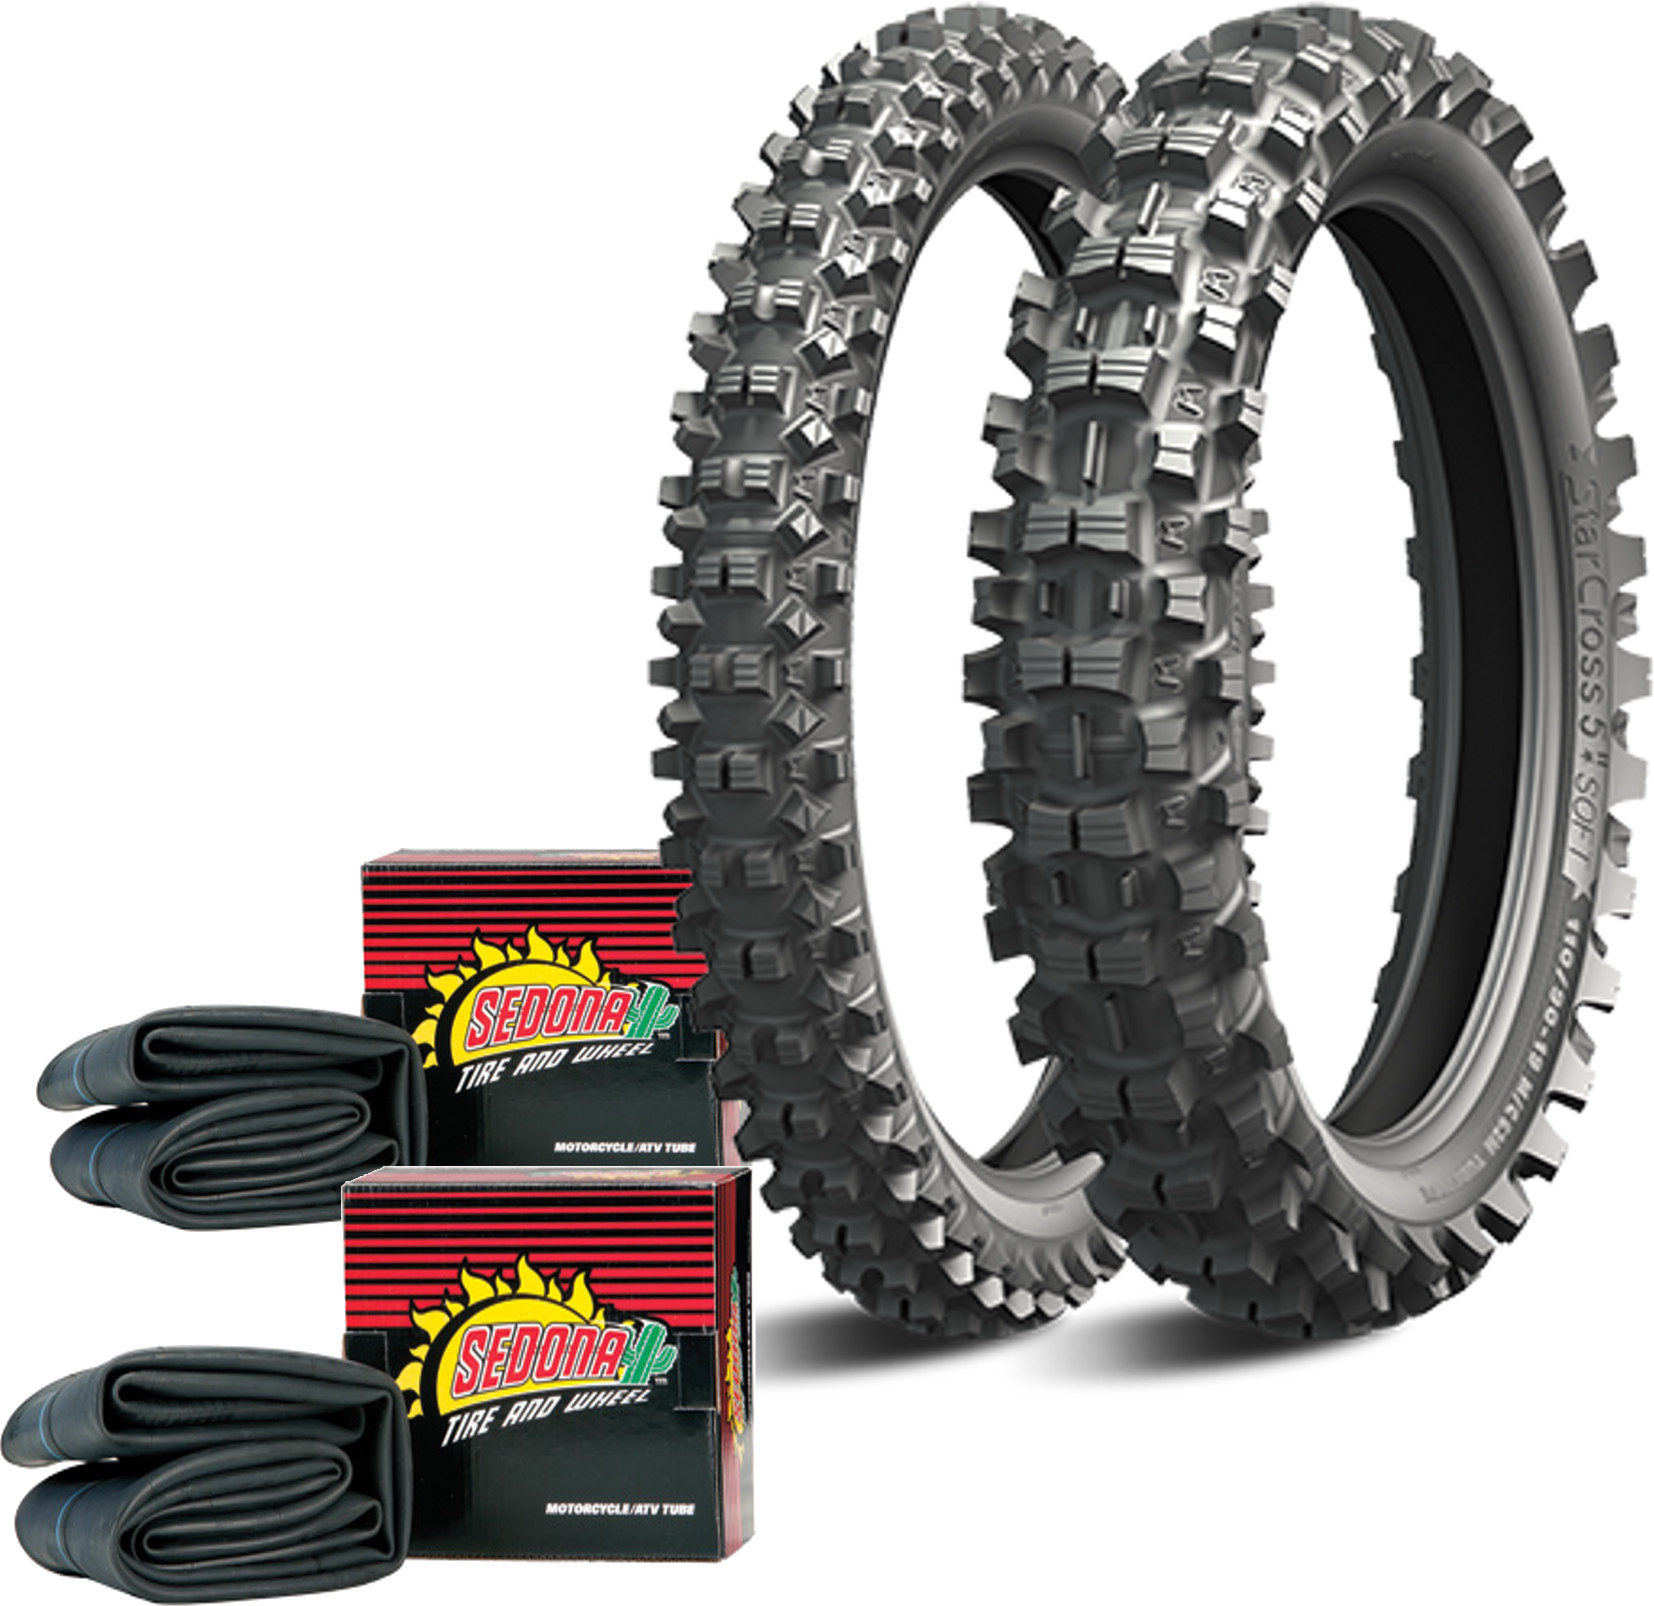 Starcross 5 Med 110/90-19 90/100-21 - Dirt Tire Kit w/ Tubes - Click Image to Close